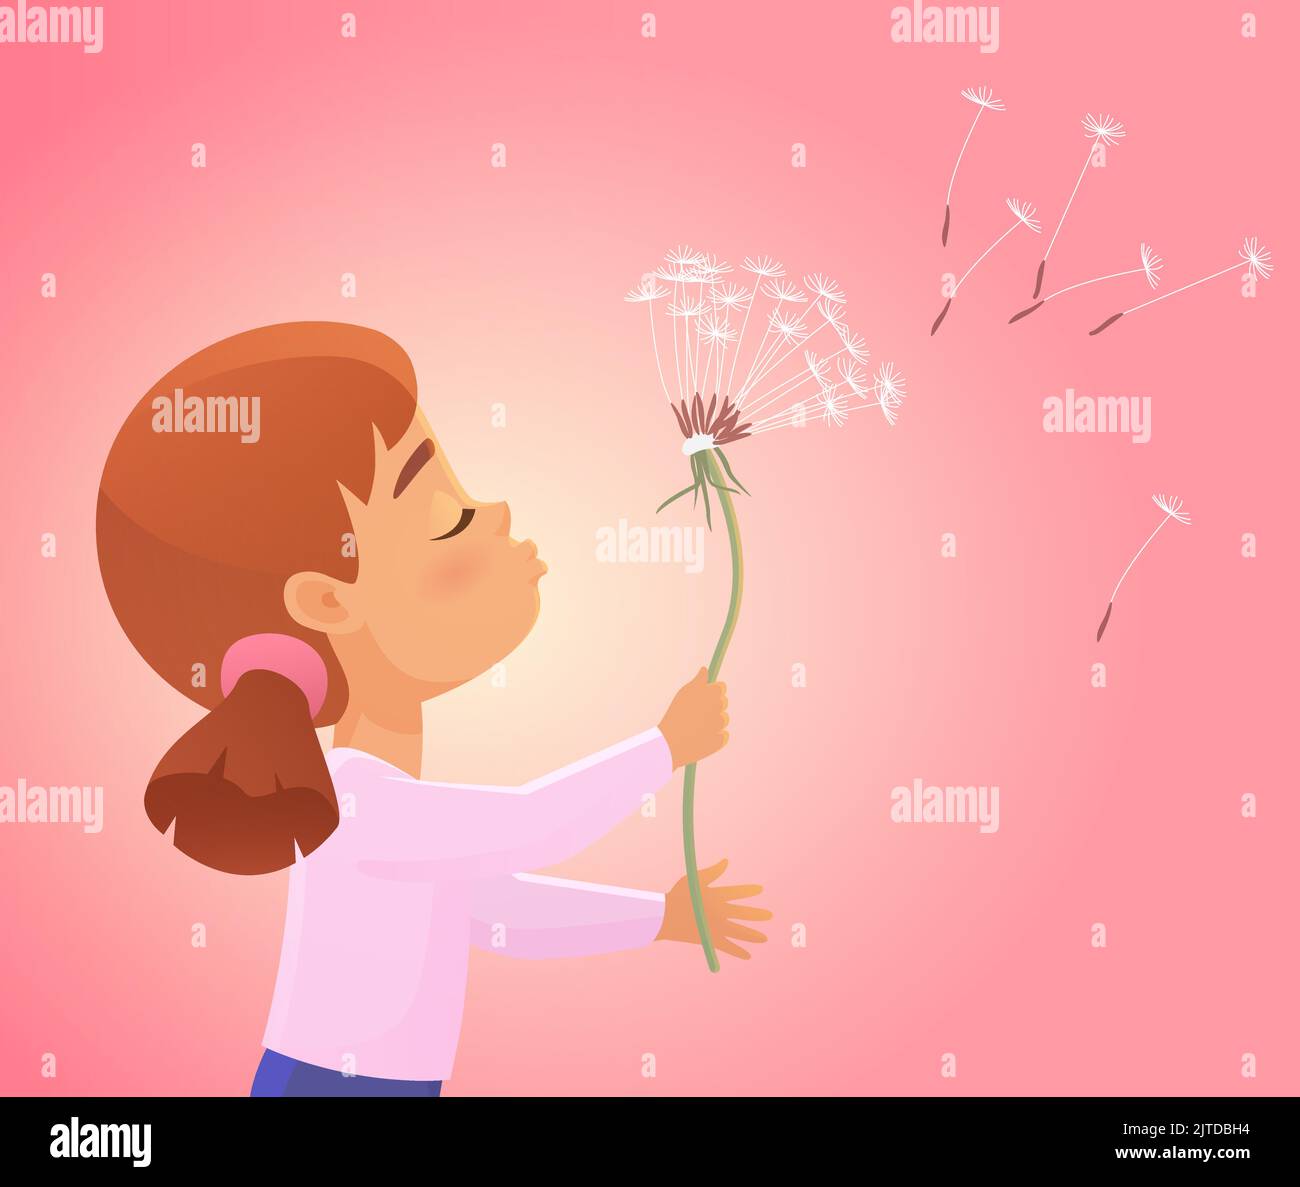 Cute girl blowing on dandelion, flower seeds flying away with wind vector illustration. Cartoon little kid enjoying spring in nature, make wish background. Childhood, aspirations, imagination concept Stock Vector